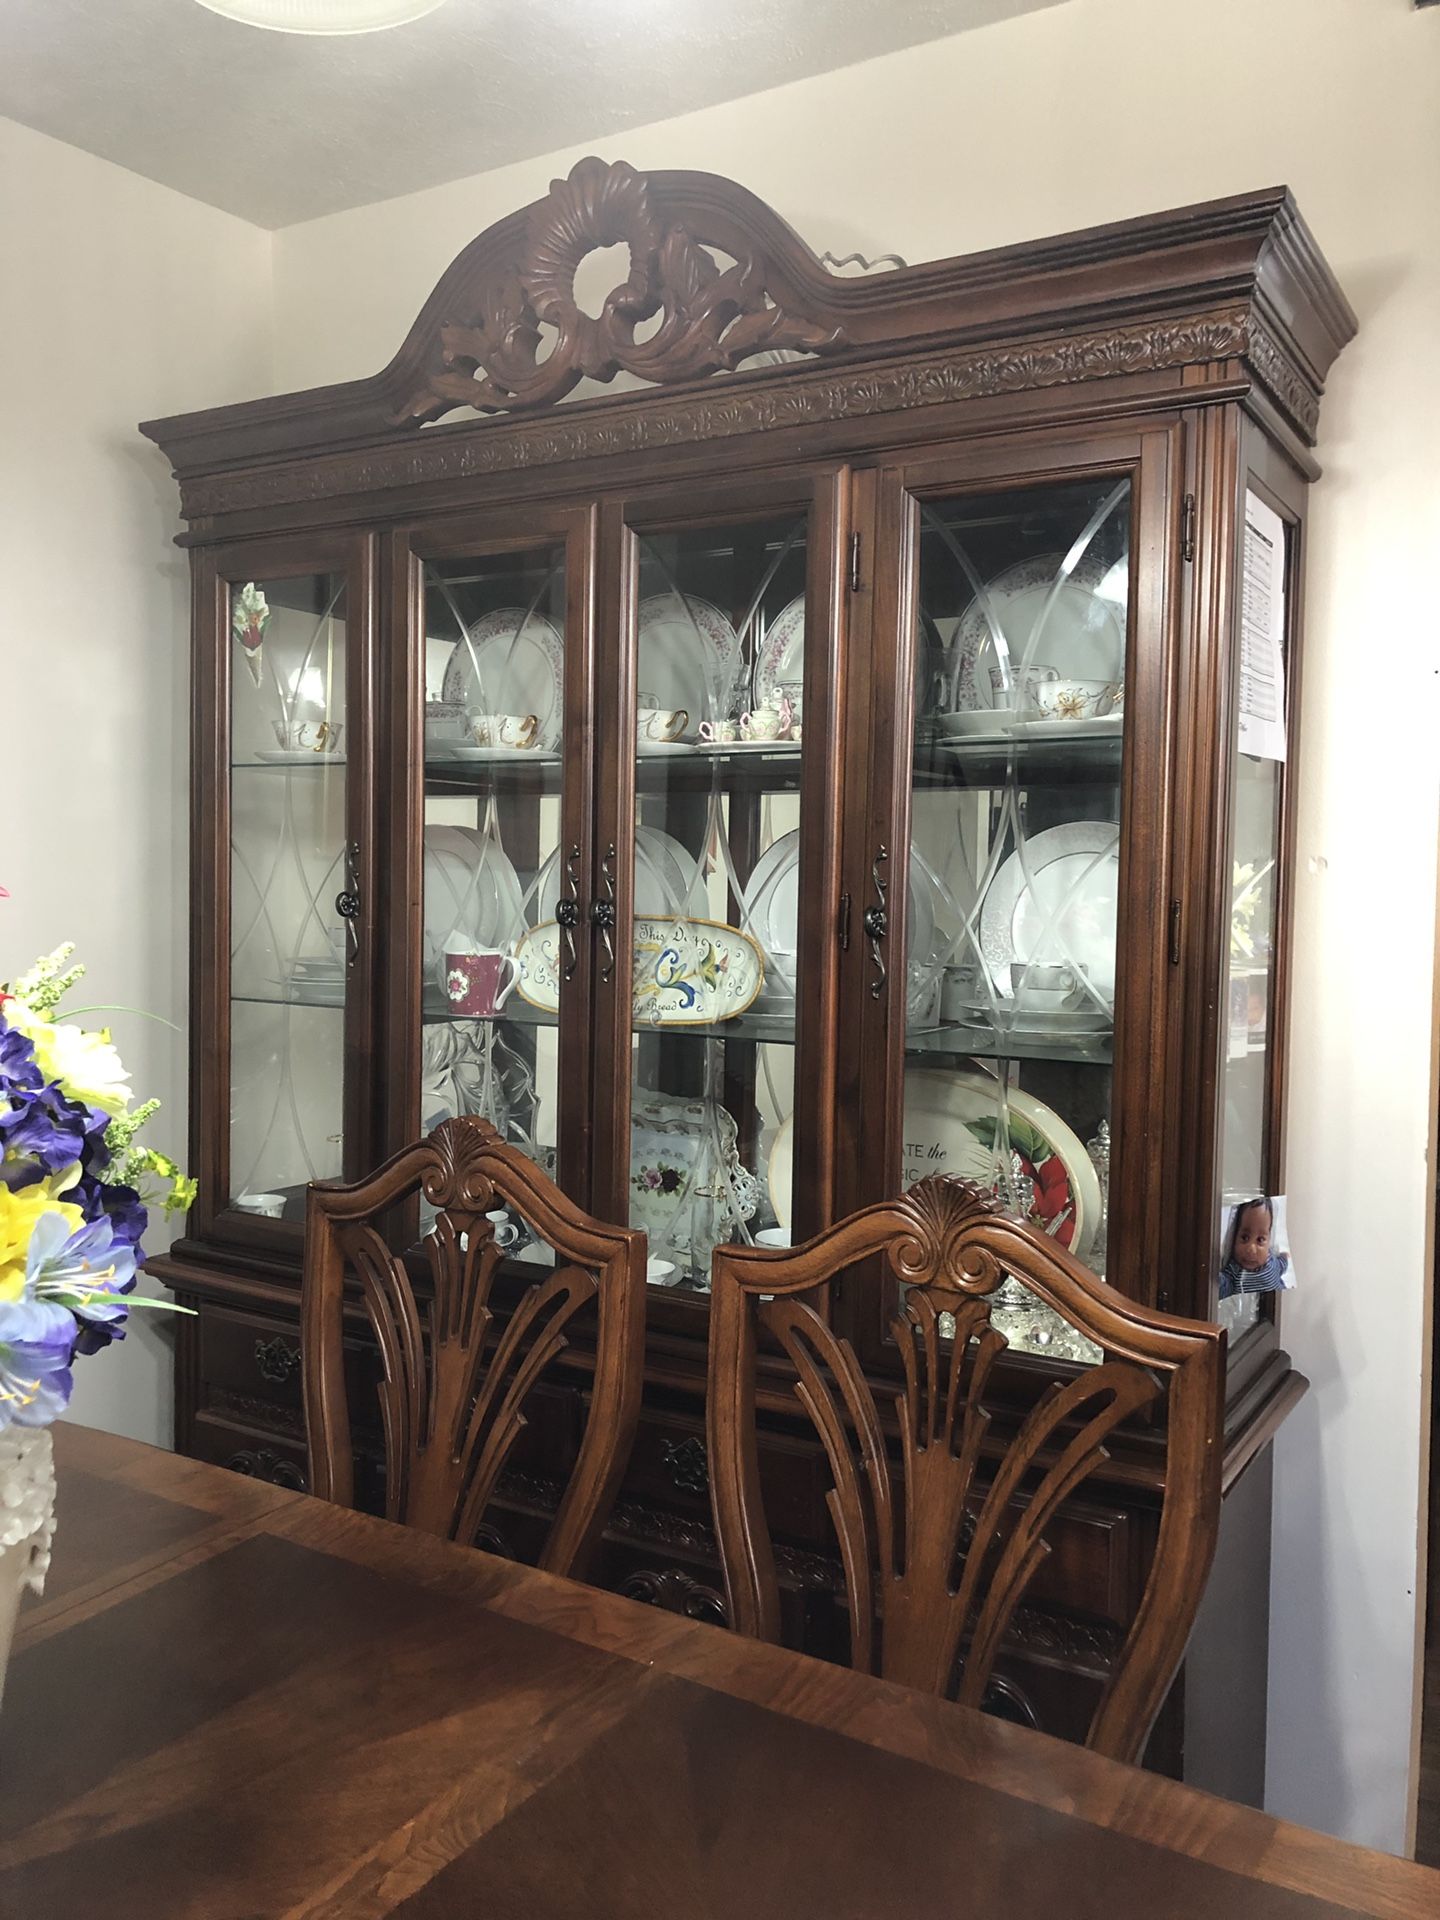 Dining room set with China and living show case